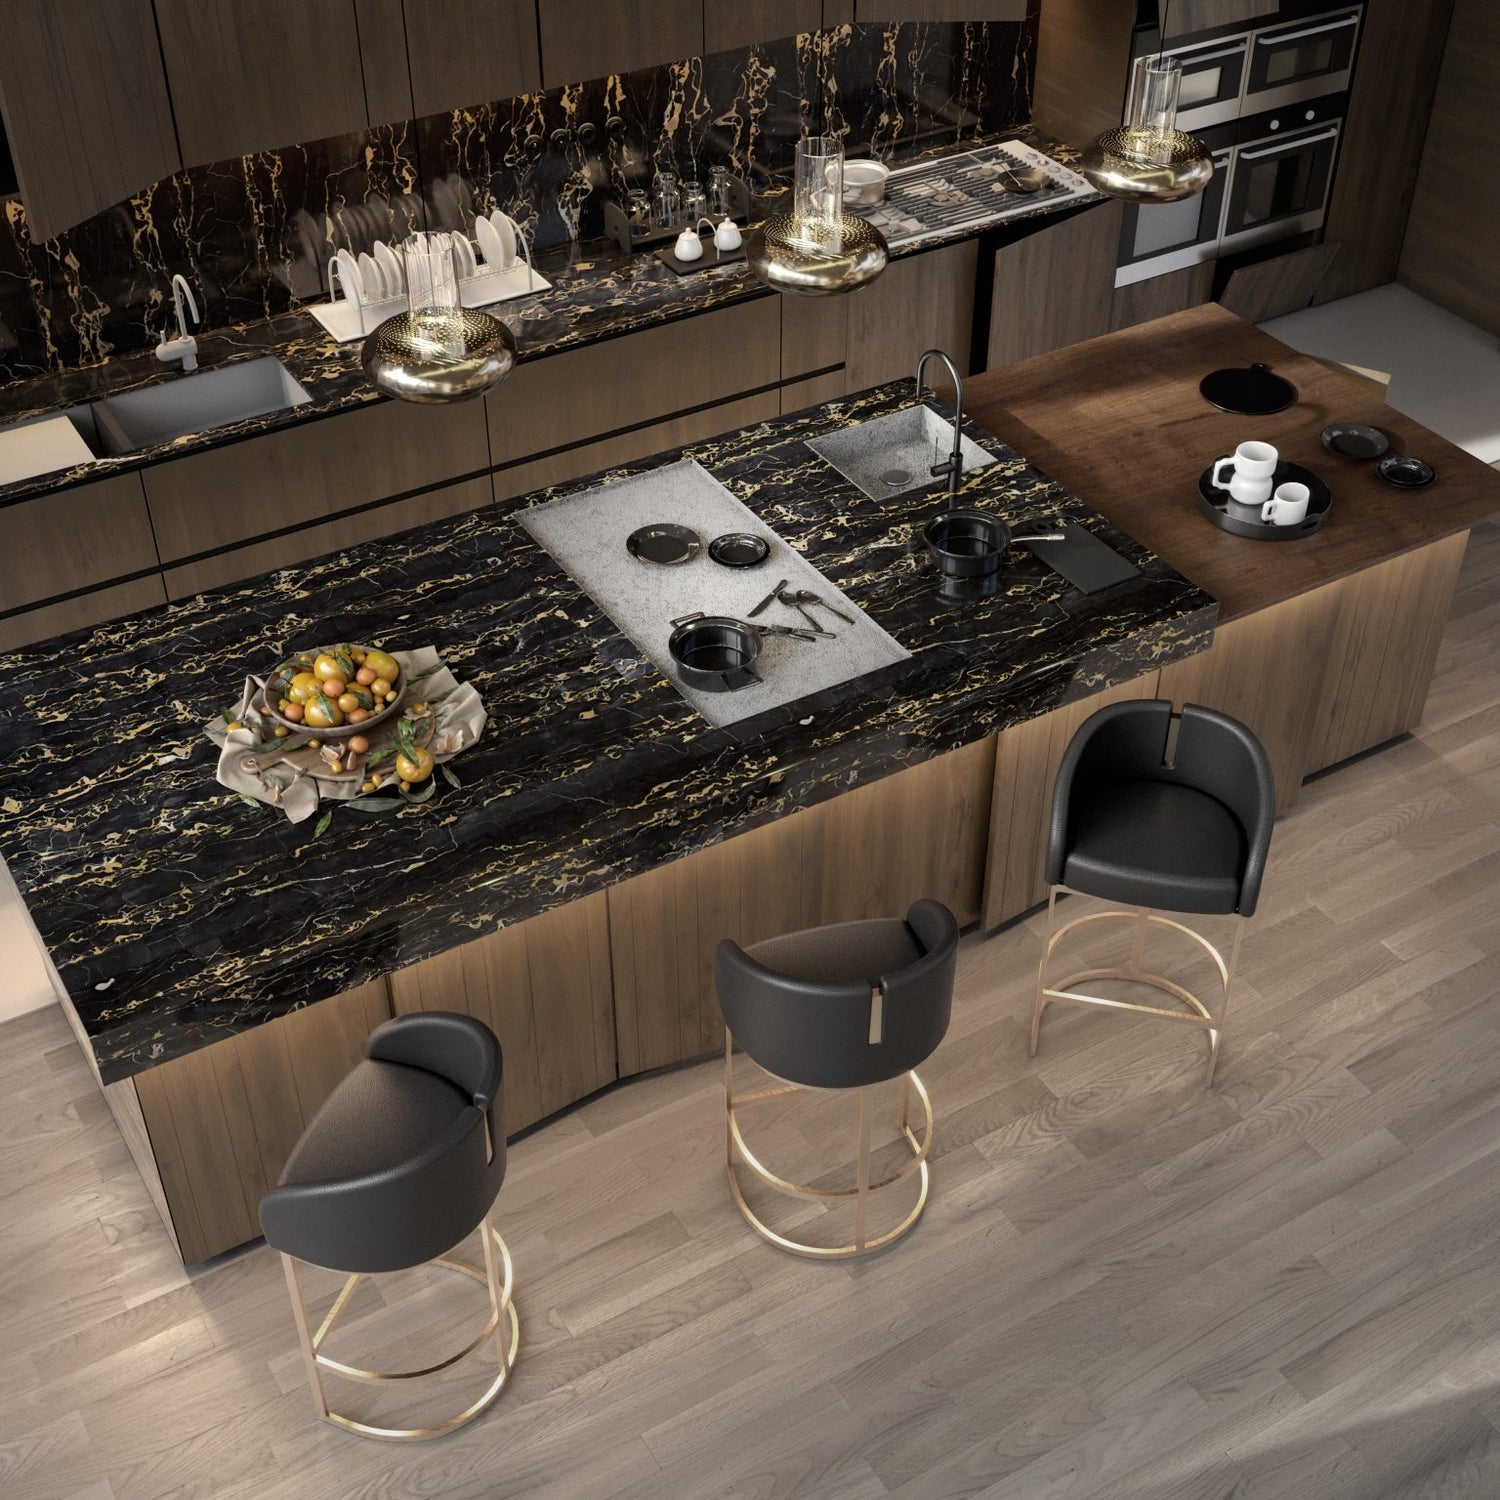 Overhead view of kitchen counter with dark marble countertop and gold and dark leather stools.